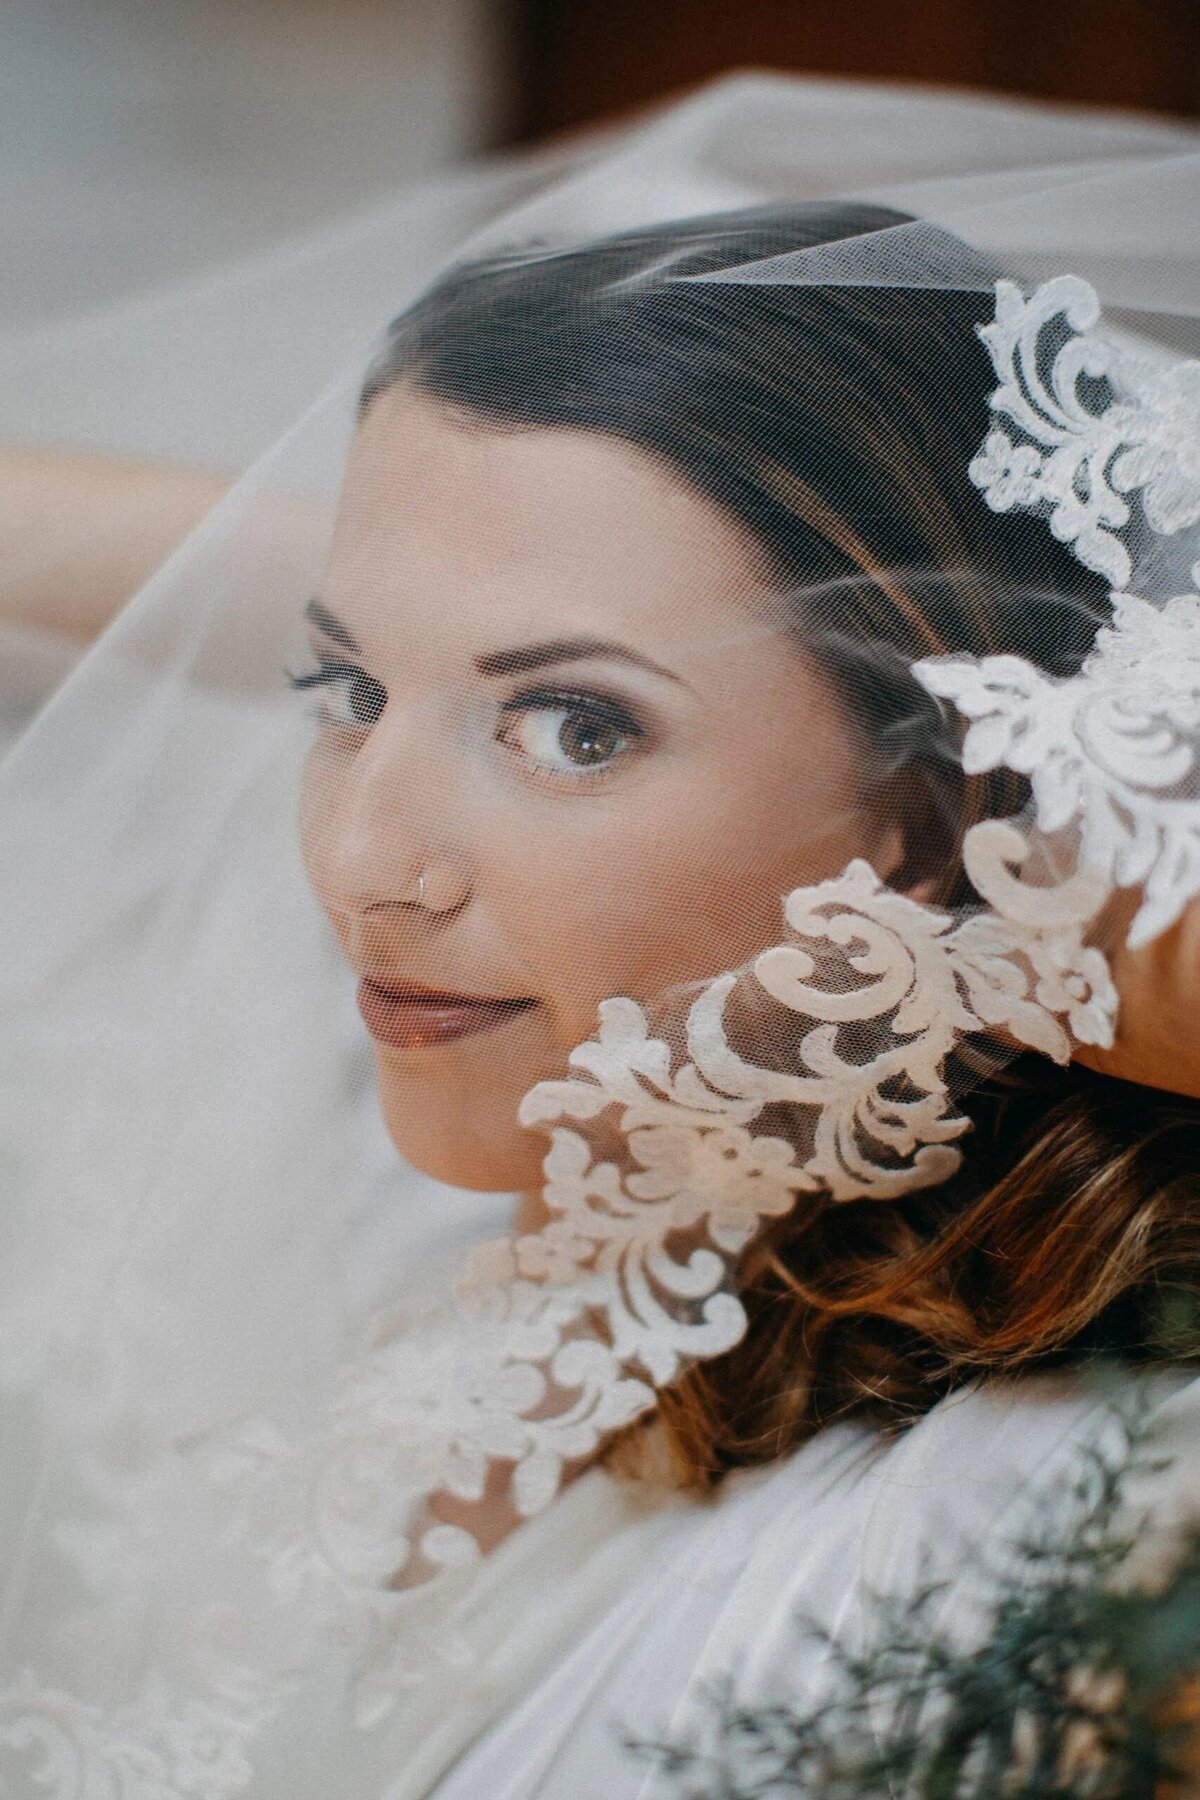 A bride's face is partially veiled by her ornate lace veil